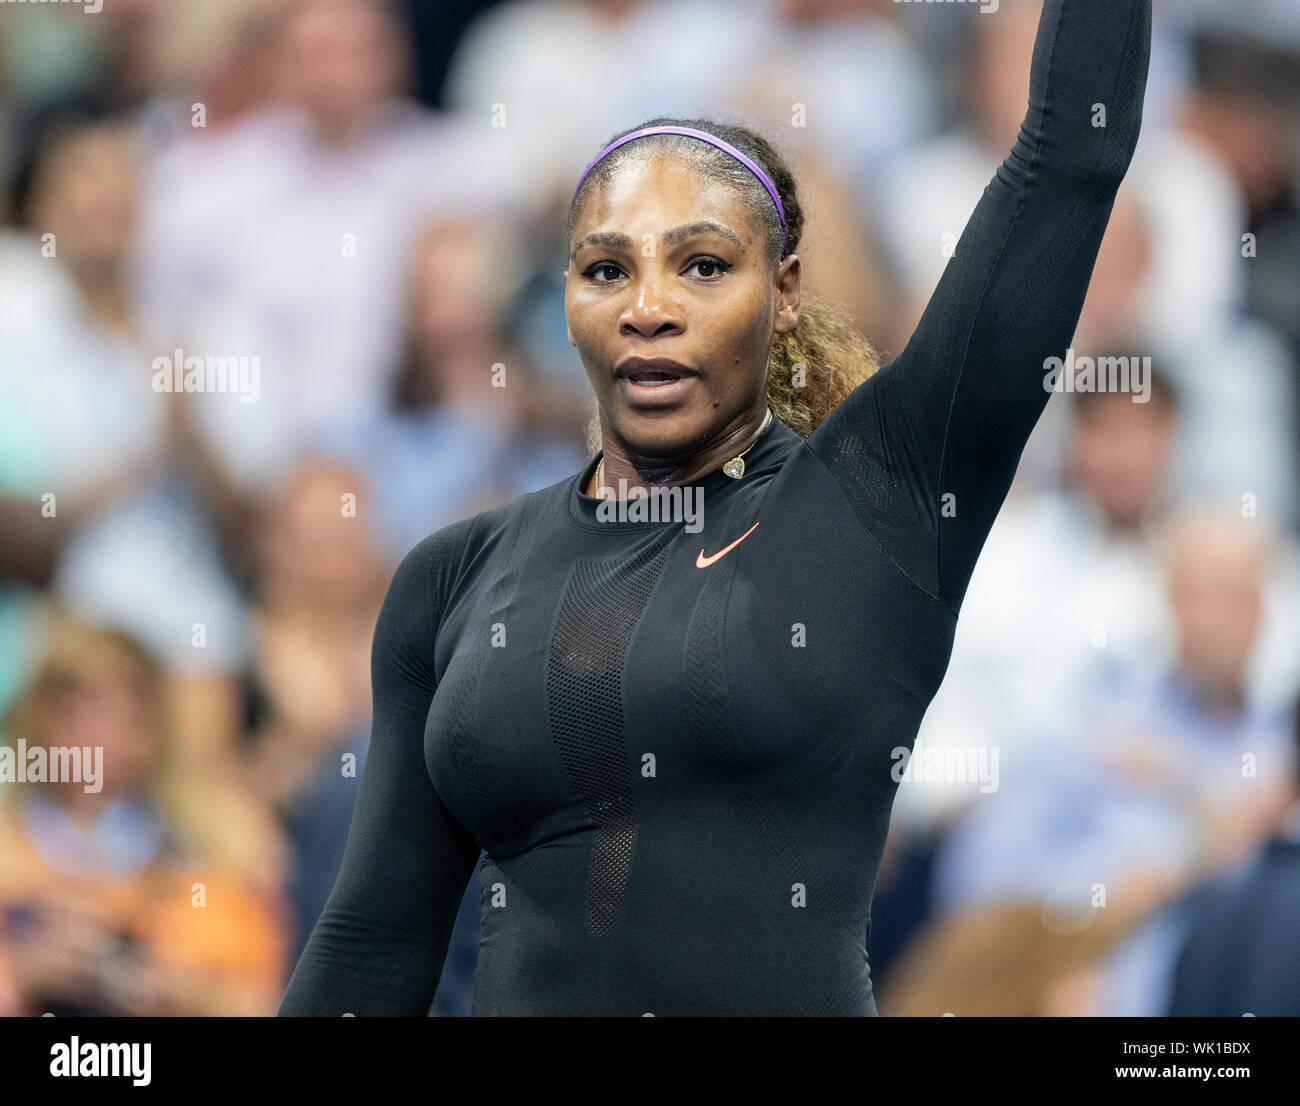 New York, NY - September 3, 2019: Serena Williams (USA) celebrates victory in quarter final of US Open Championships against Qiang Wang (China) at Billie Jean King National Tennis Center Stock Photo